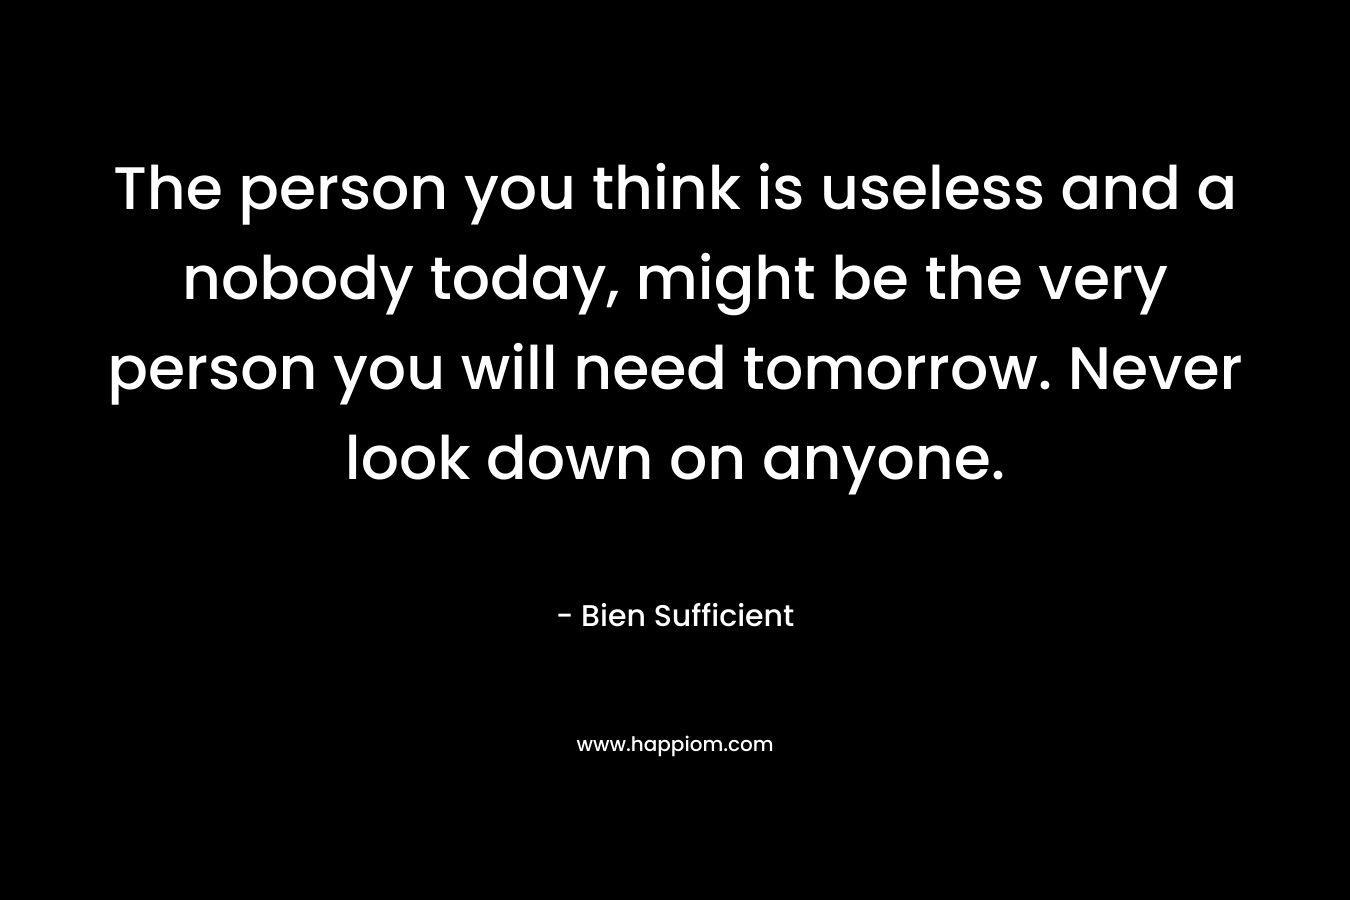 The person you think is useless and a nobody today, might be the very person you will need tomorrow. Never look down on anyone. – Bien Sufficient